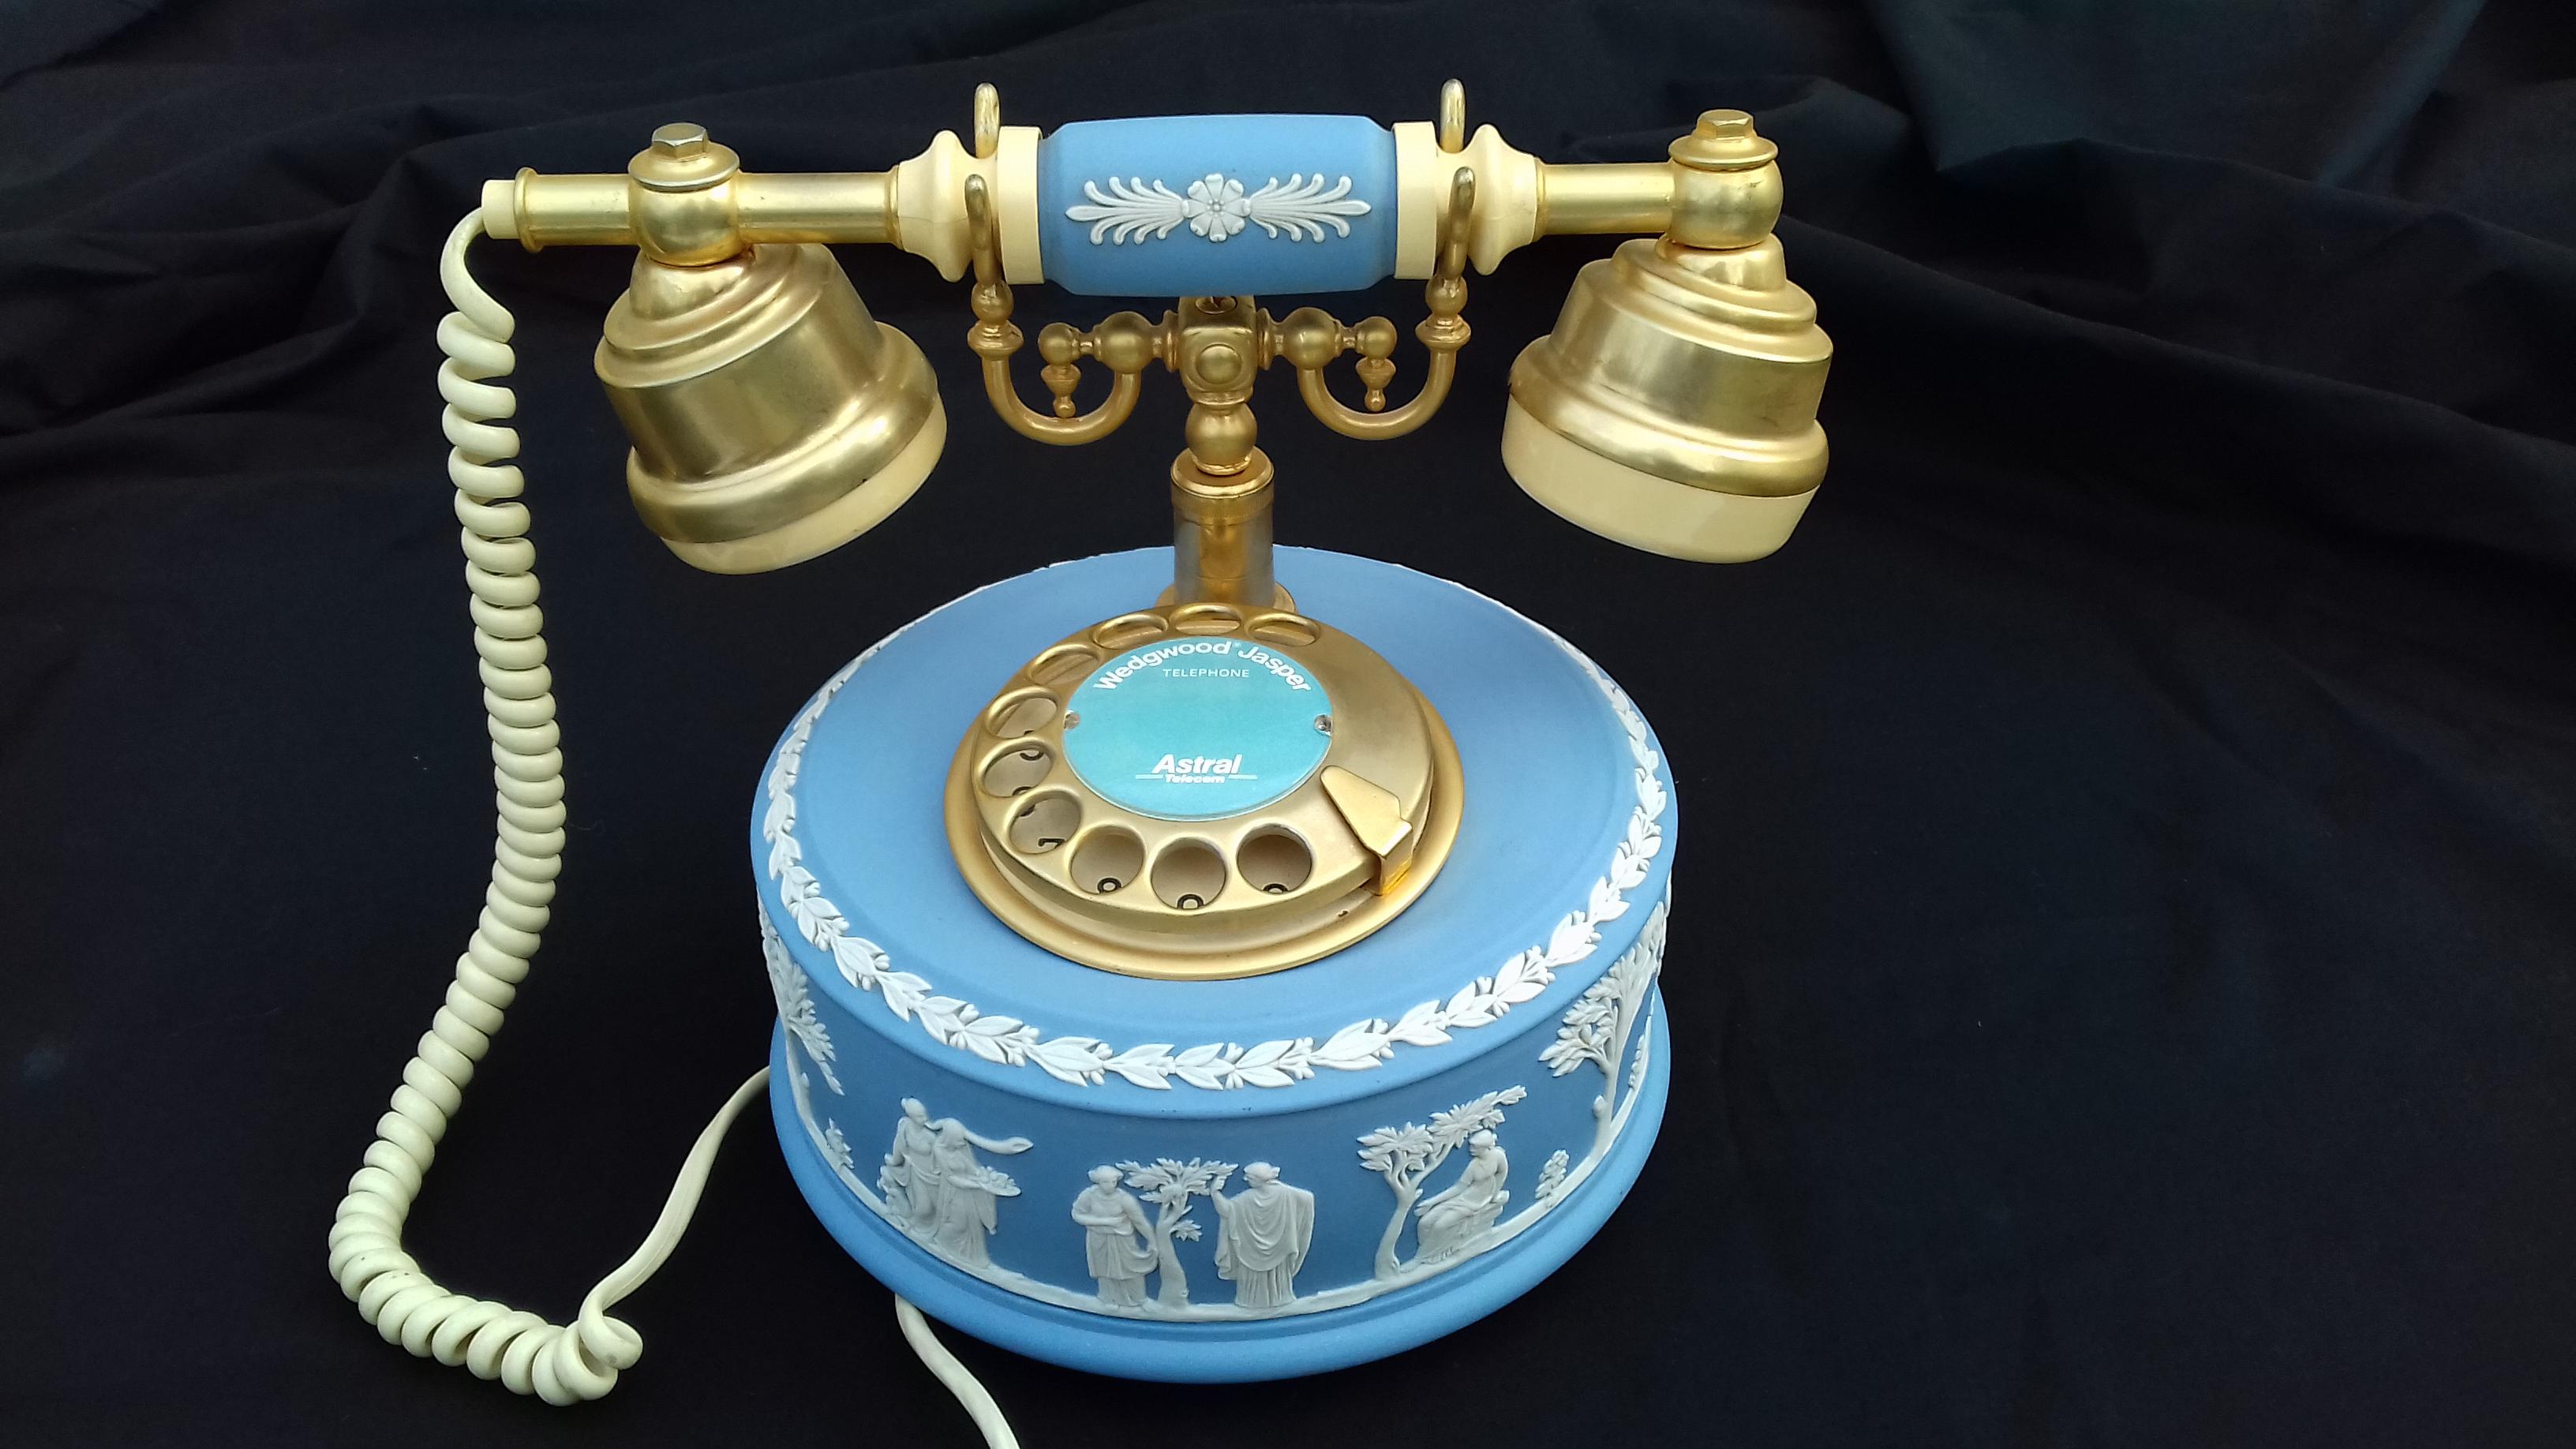 Exceptional and Rare Authentic Wedgwood Blue Jasper Telephone

Wedgwood is a Registered Company of British pottery, porcelain and earthenware factory founded in May 1759

Made in England by Astral Internatioanl LTD, at the end of XX century

This is